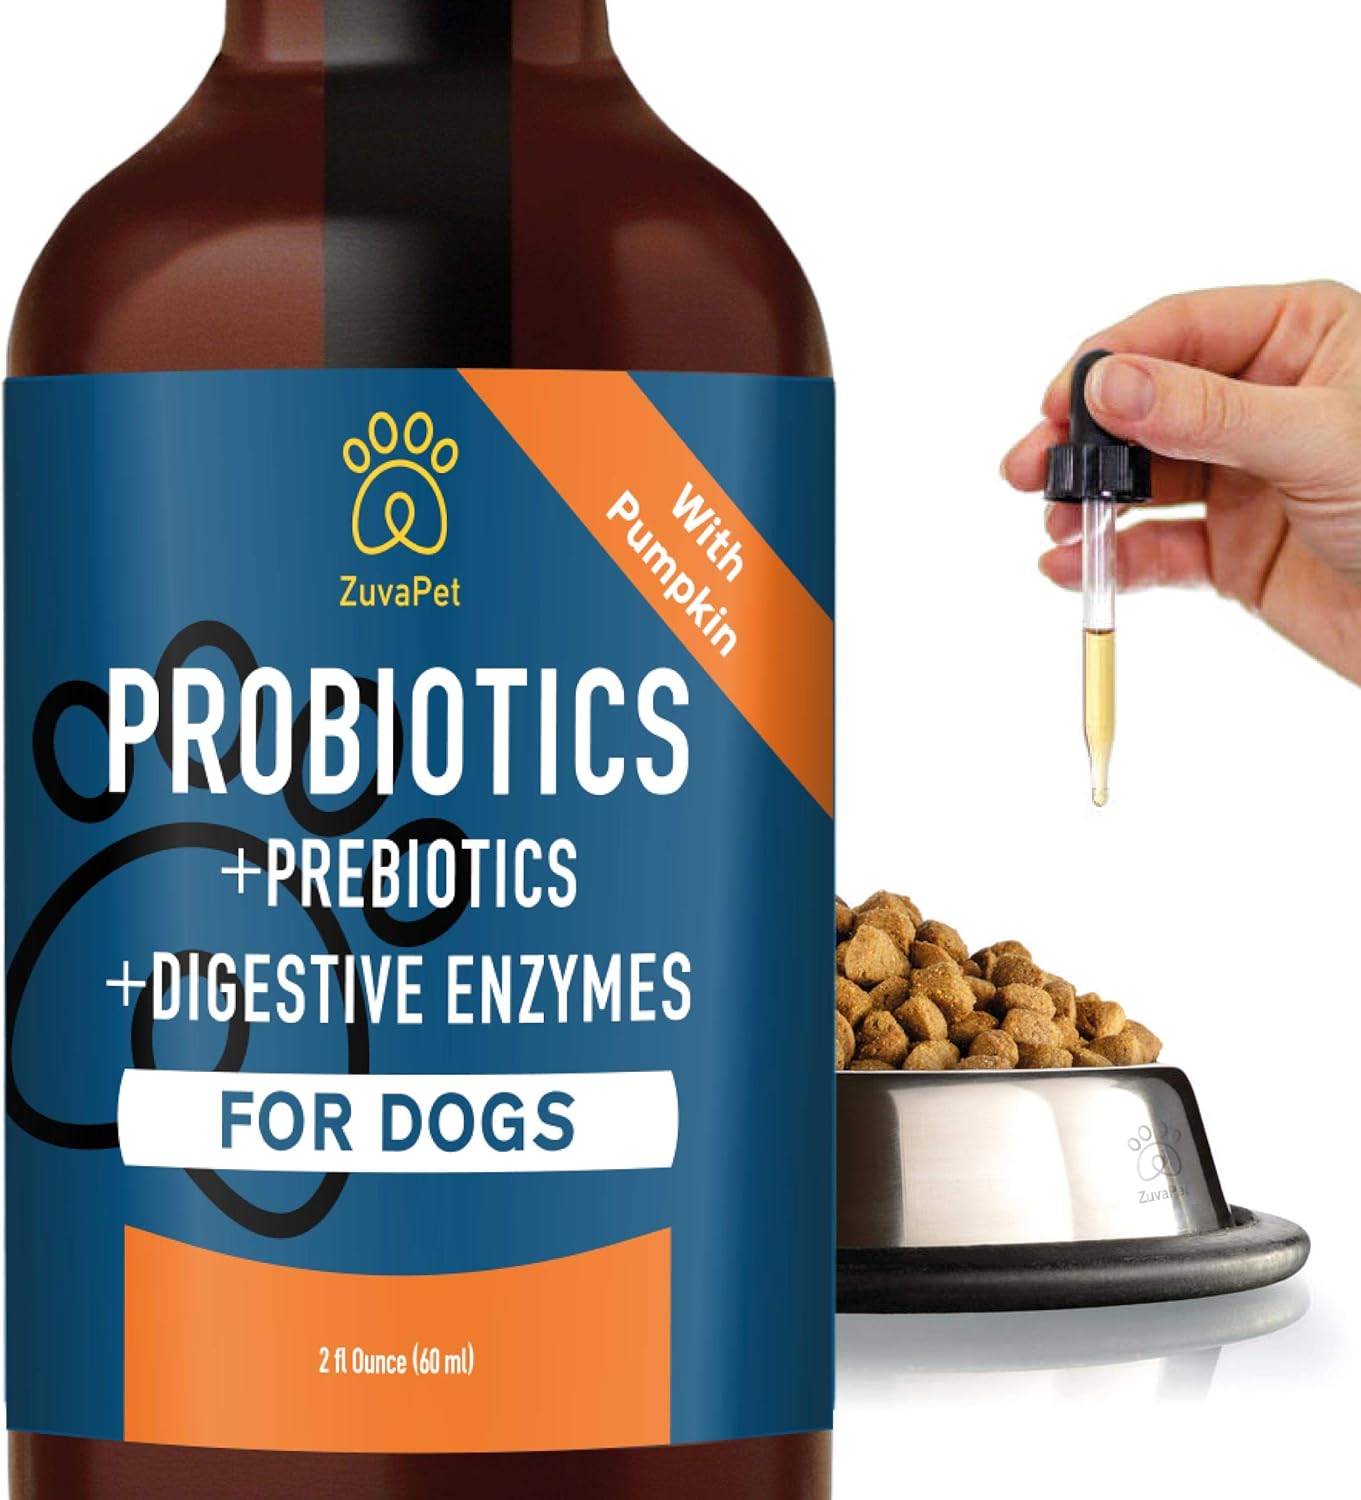 Probiotics for Dogs - Dog Probiotics for Diarrhea - Natural Digestive Enzymes for Upset Stomach Relief + Gas, Constipation Health & Itch Relief - Prebiotic Pet Supplies - 120 Servings